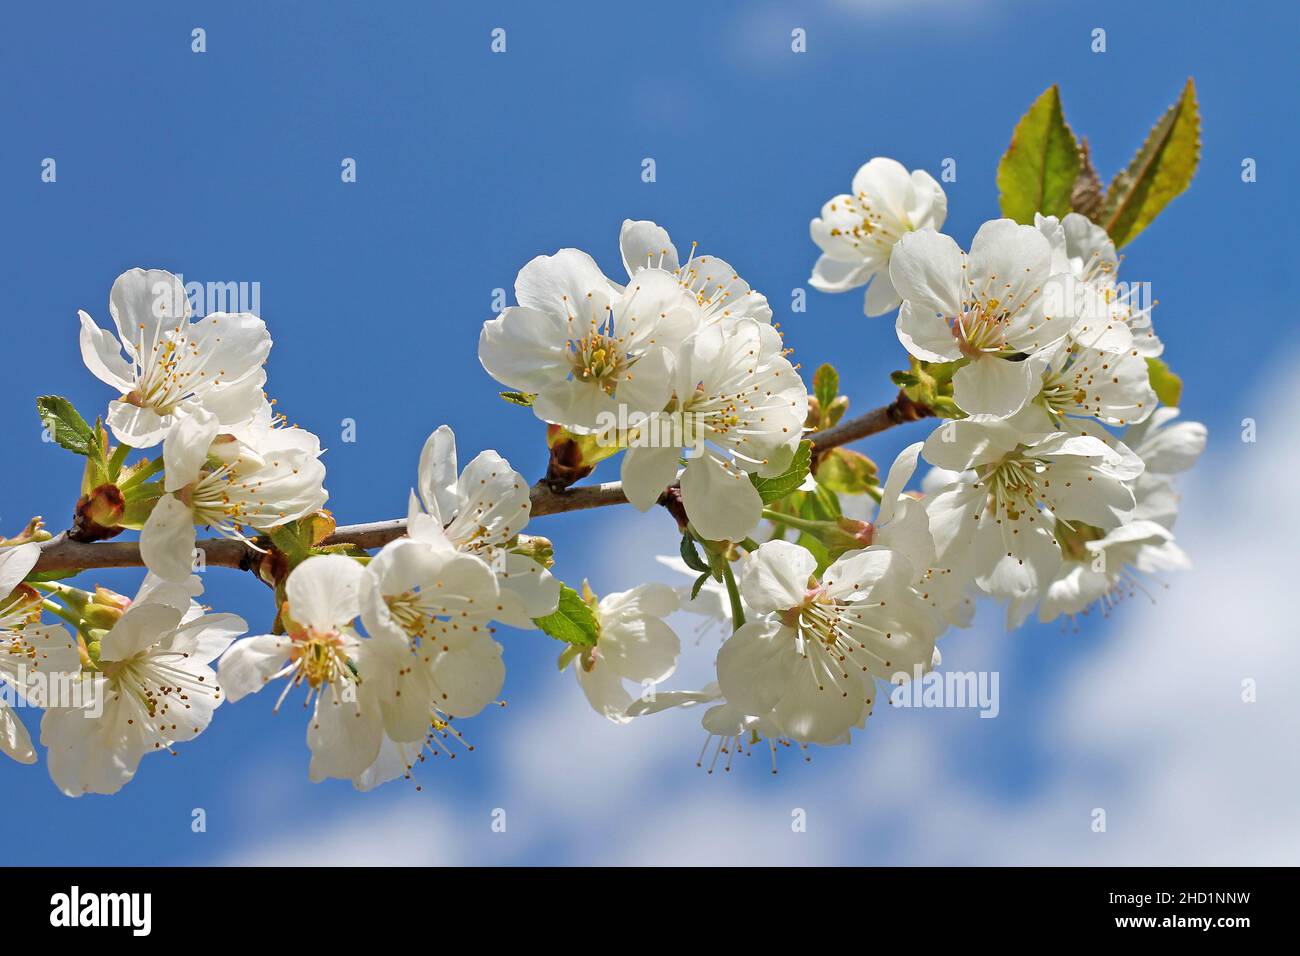 Cherry tree branch in bloom at a garden on blue sky background. Stock Photo